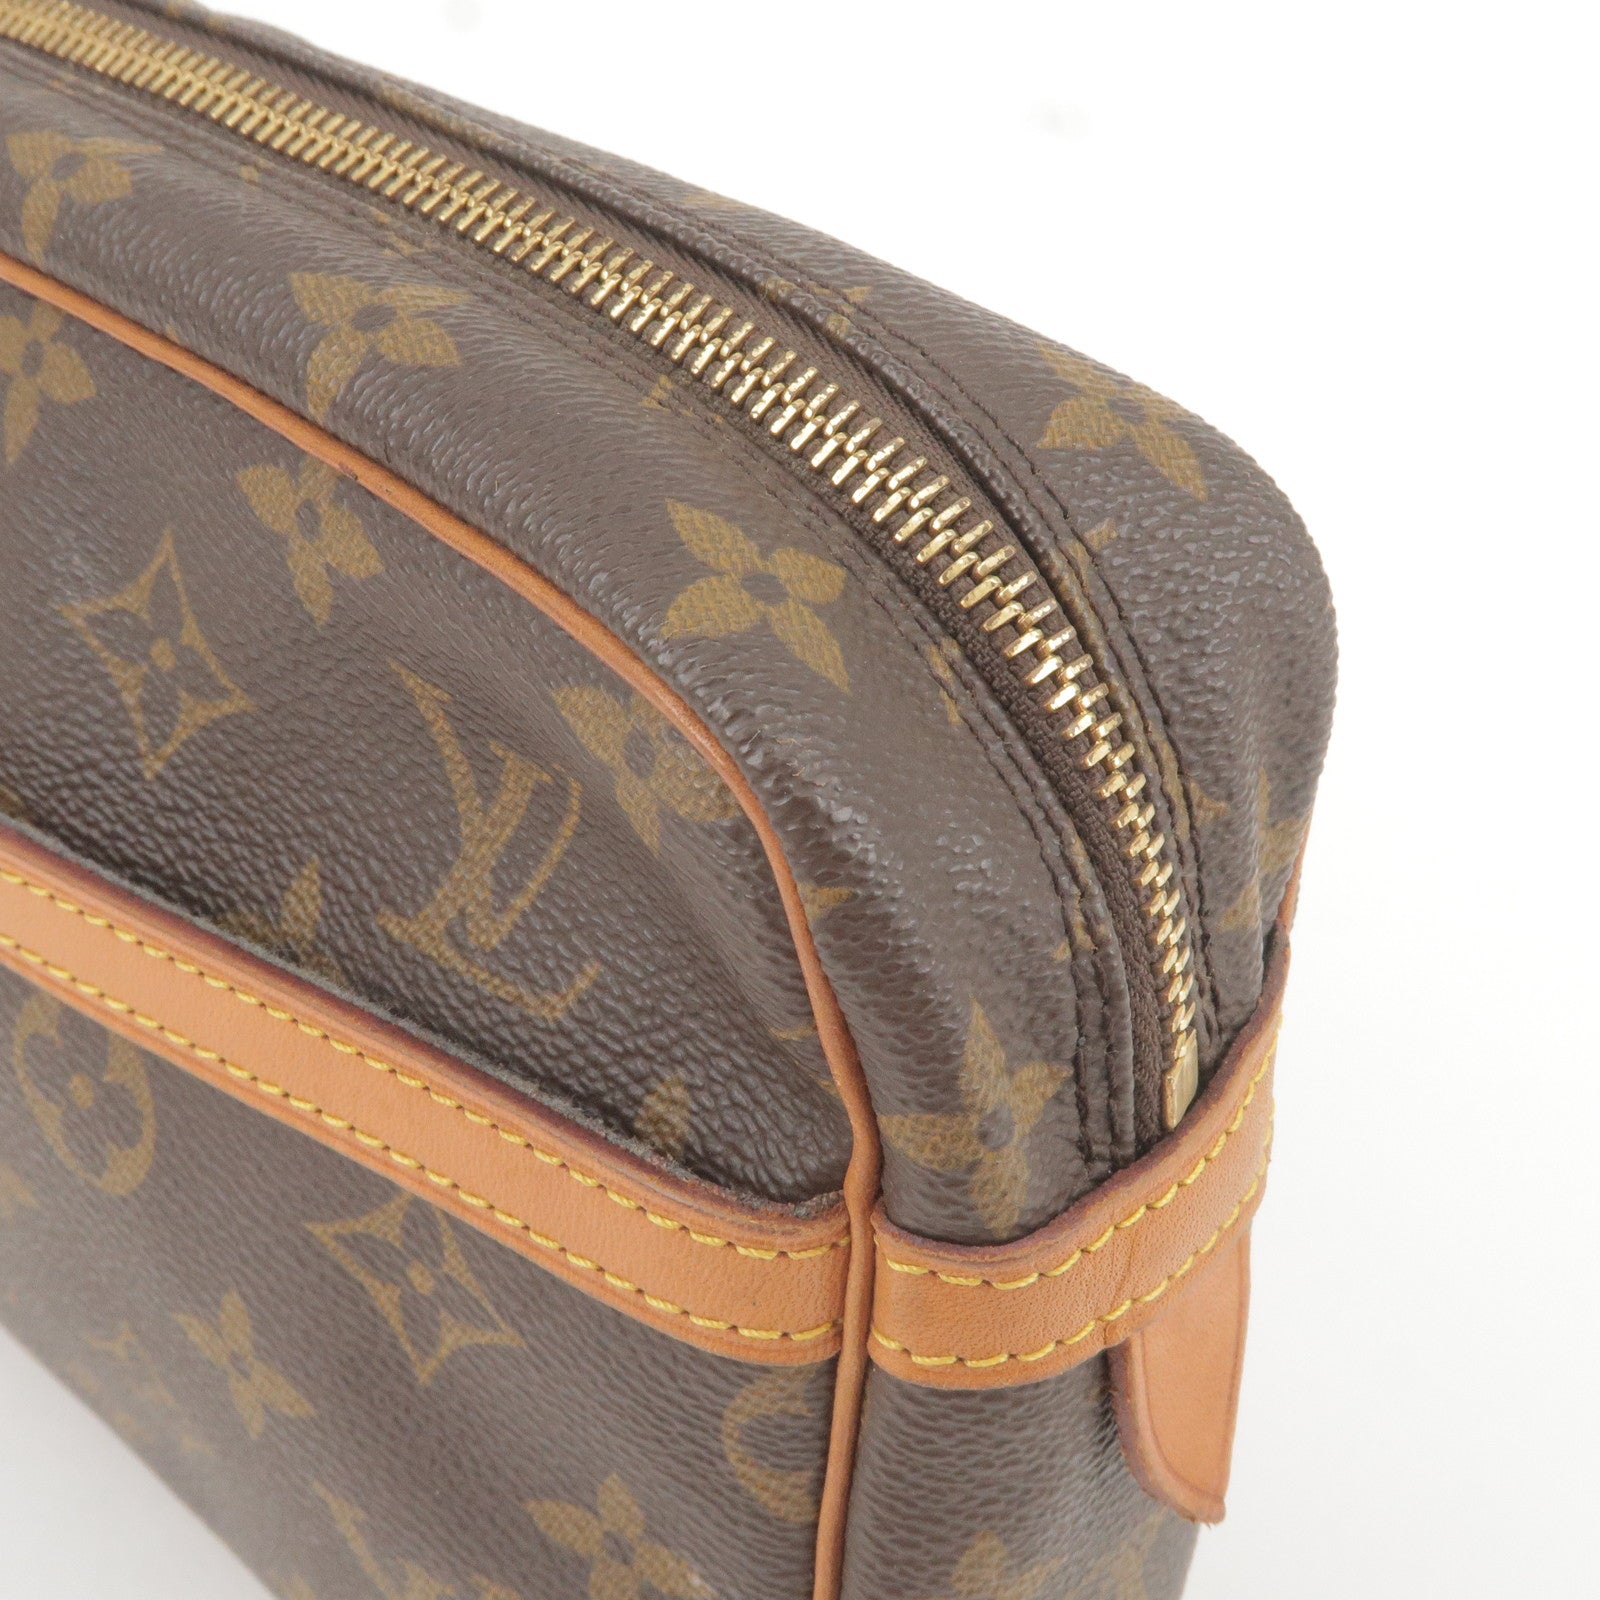 Shop second hand designer toiletry bags